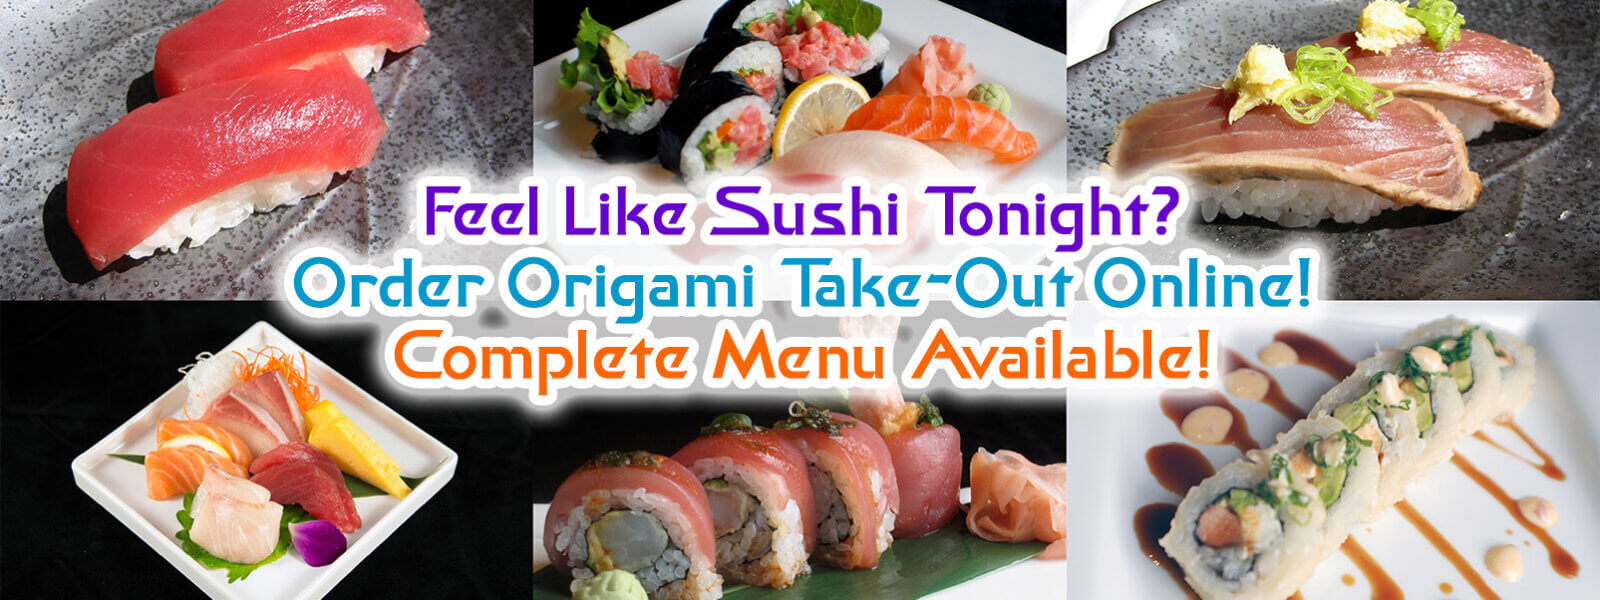 Order Origami Takeout Online